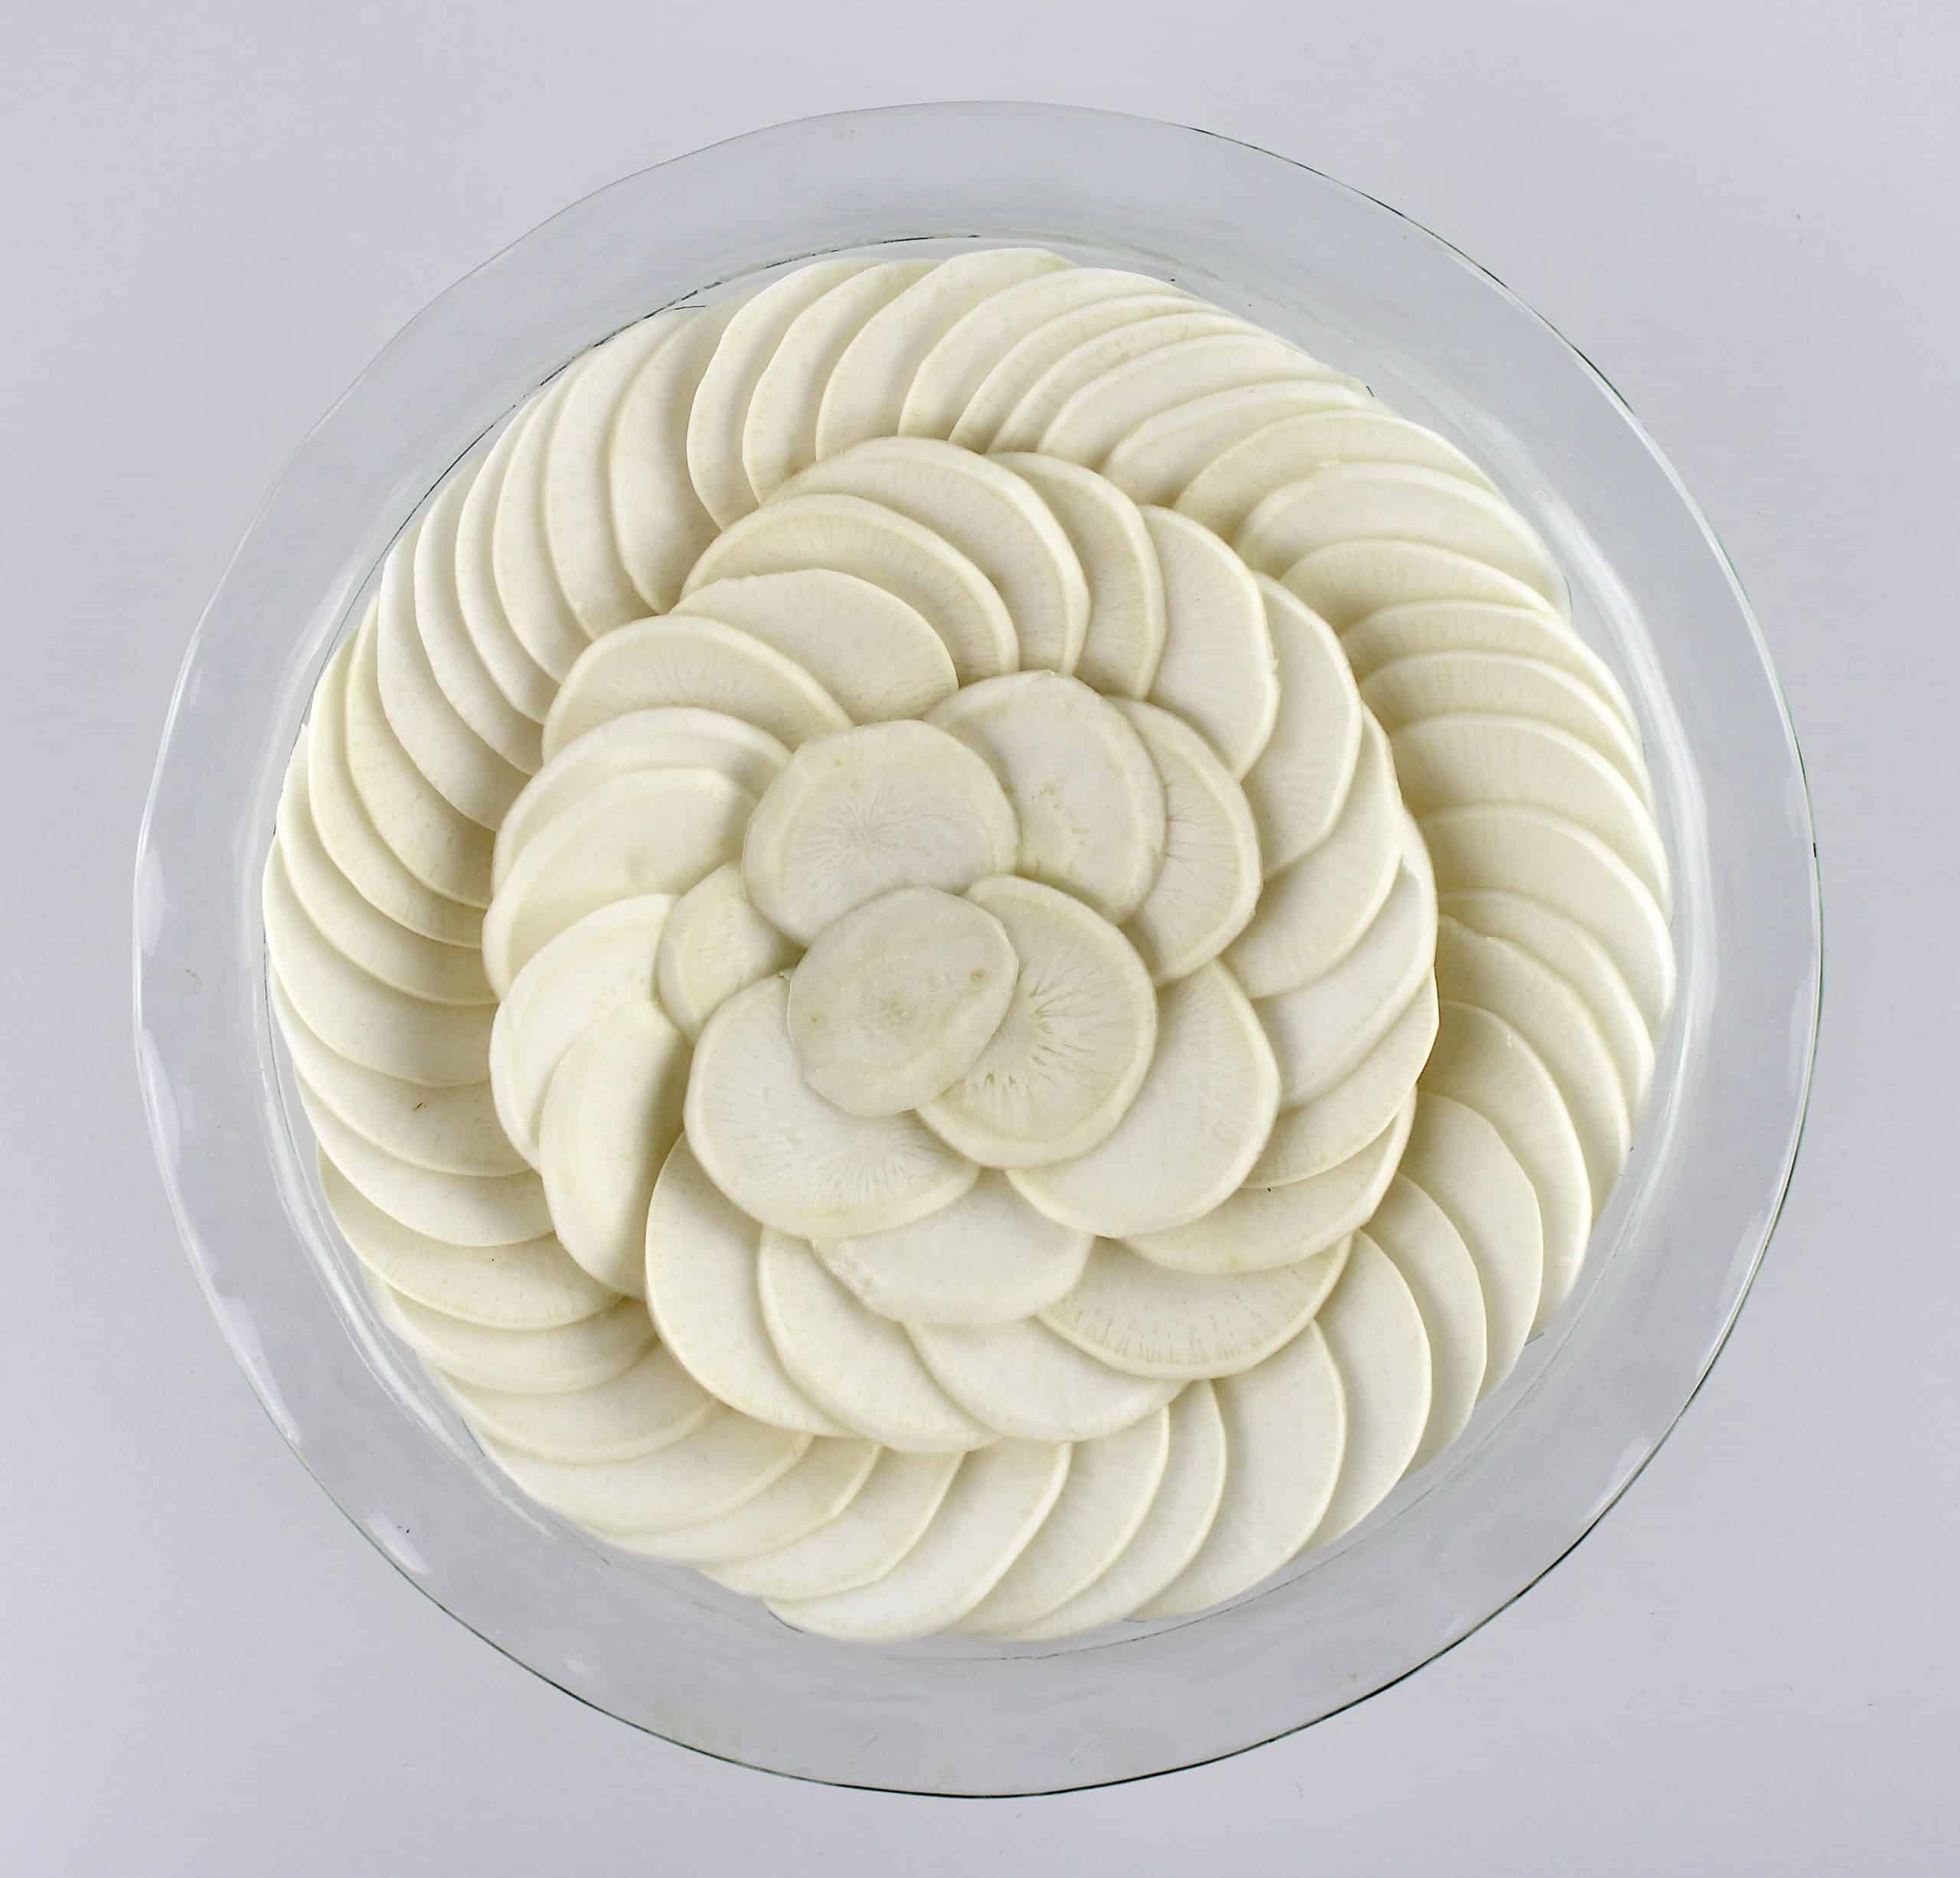 turnips slices arranged in concentric circles in glass pie dish